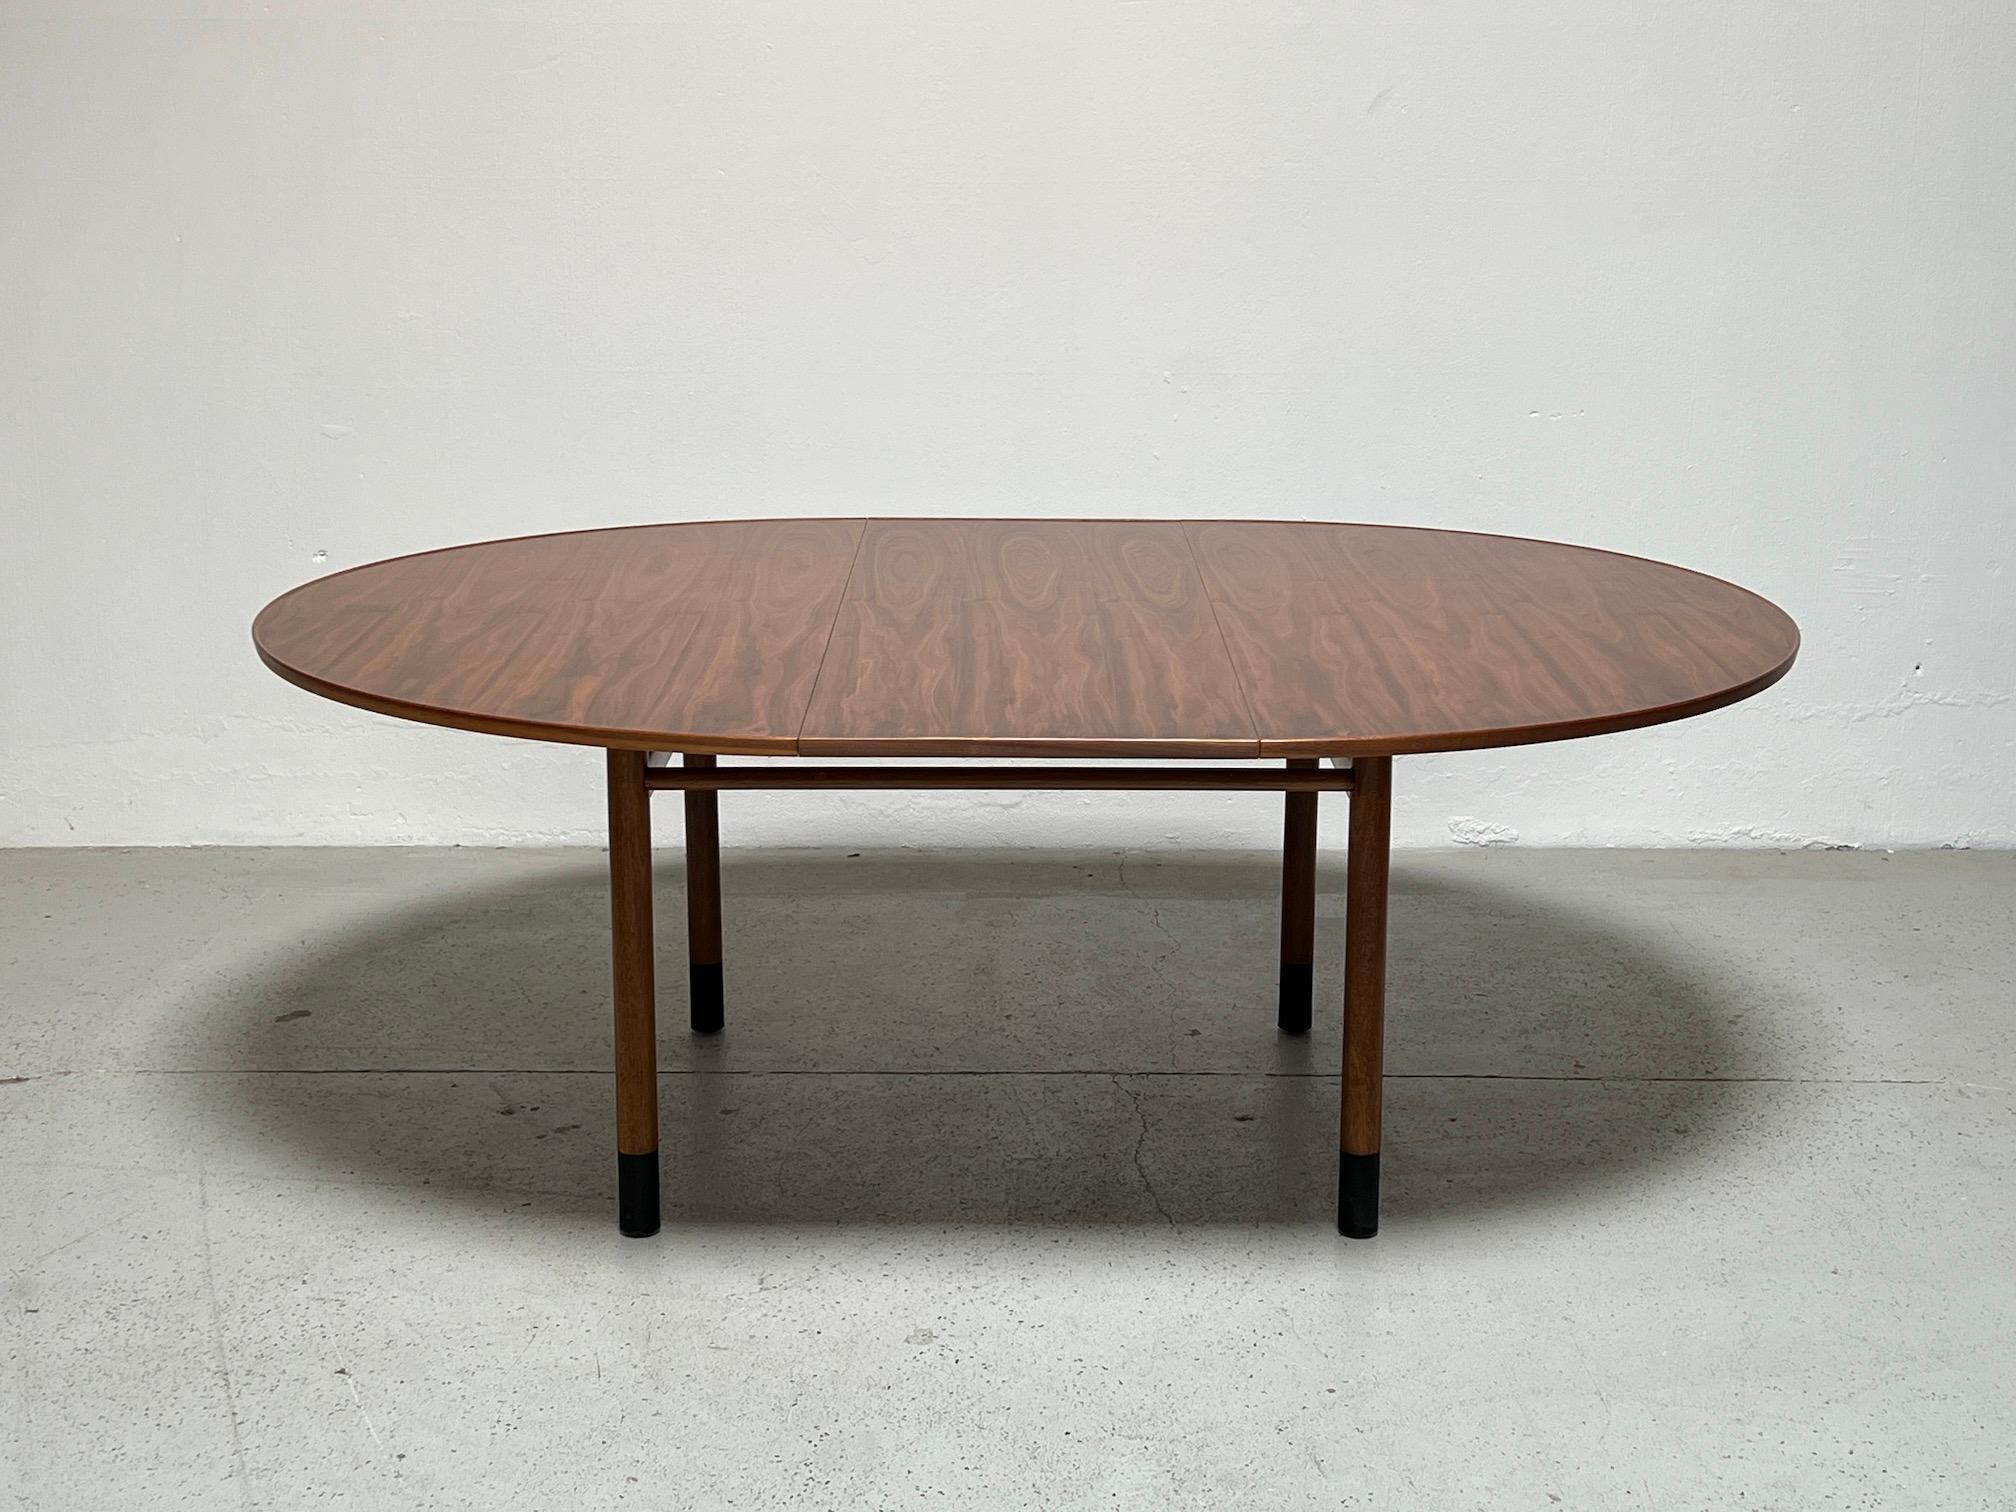 A beautifully grained walnut dining table with leather wrapped feet. Designed by Edward Wormley for Dunbar. Table measures 60